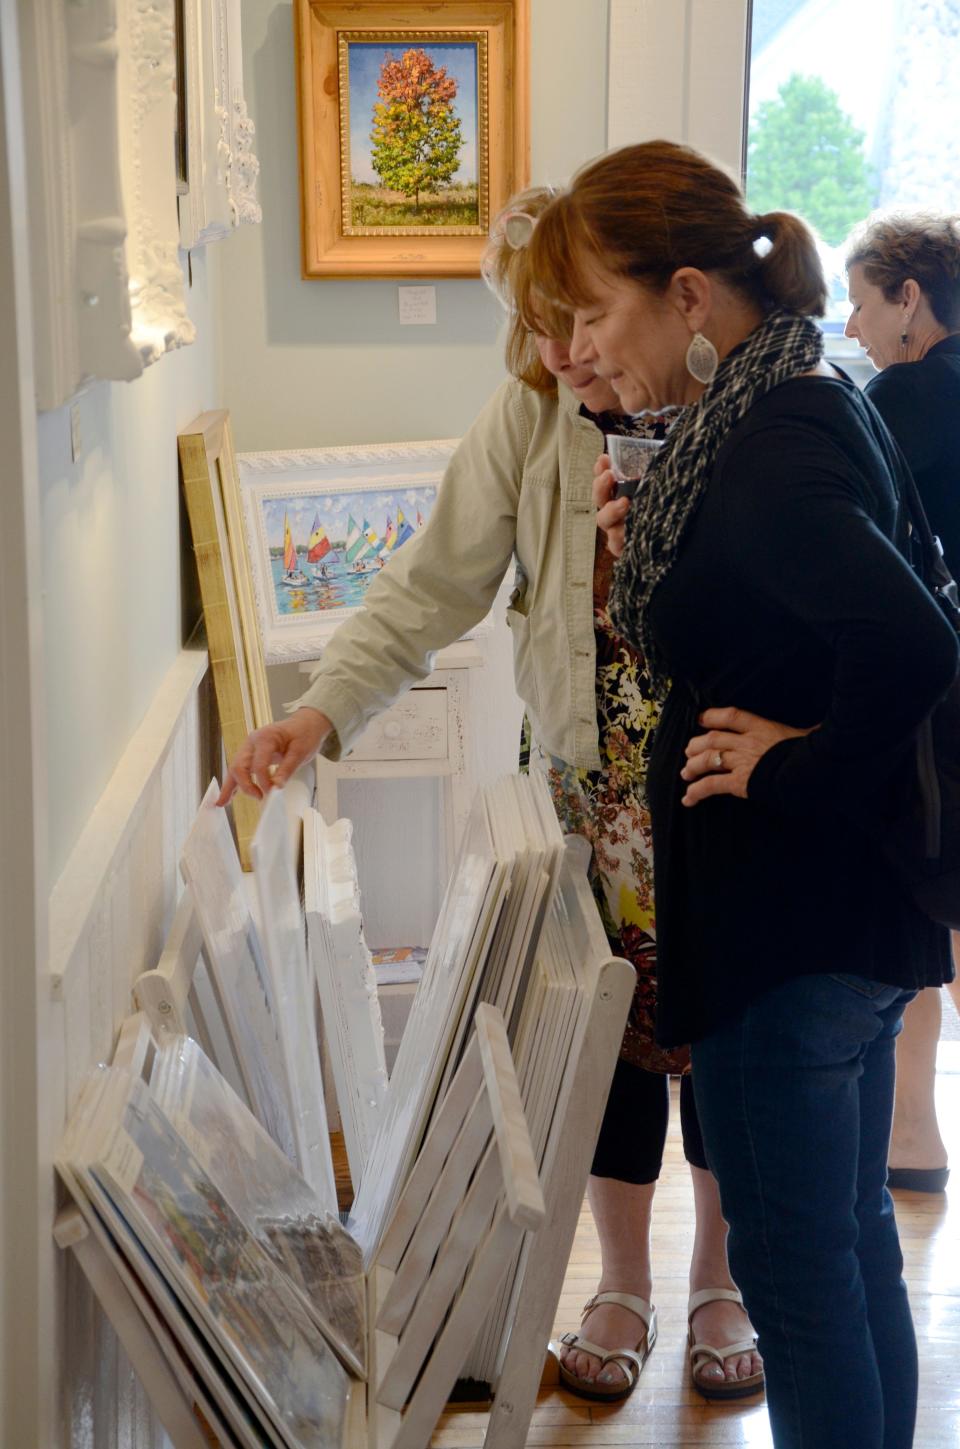 Gallery walk participants browse through prints at Witty Art Galerie during the 2019 Night of the Arts in Harbor Springs.